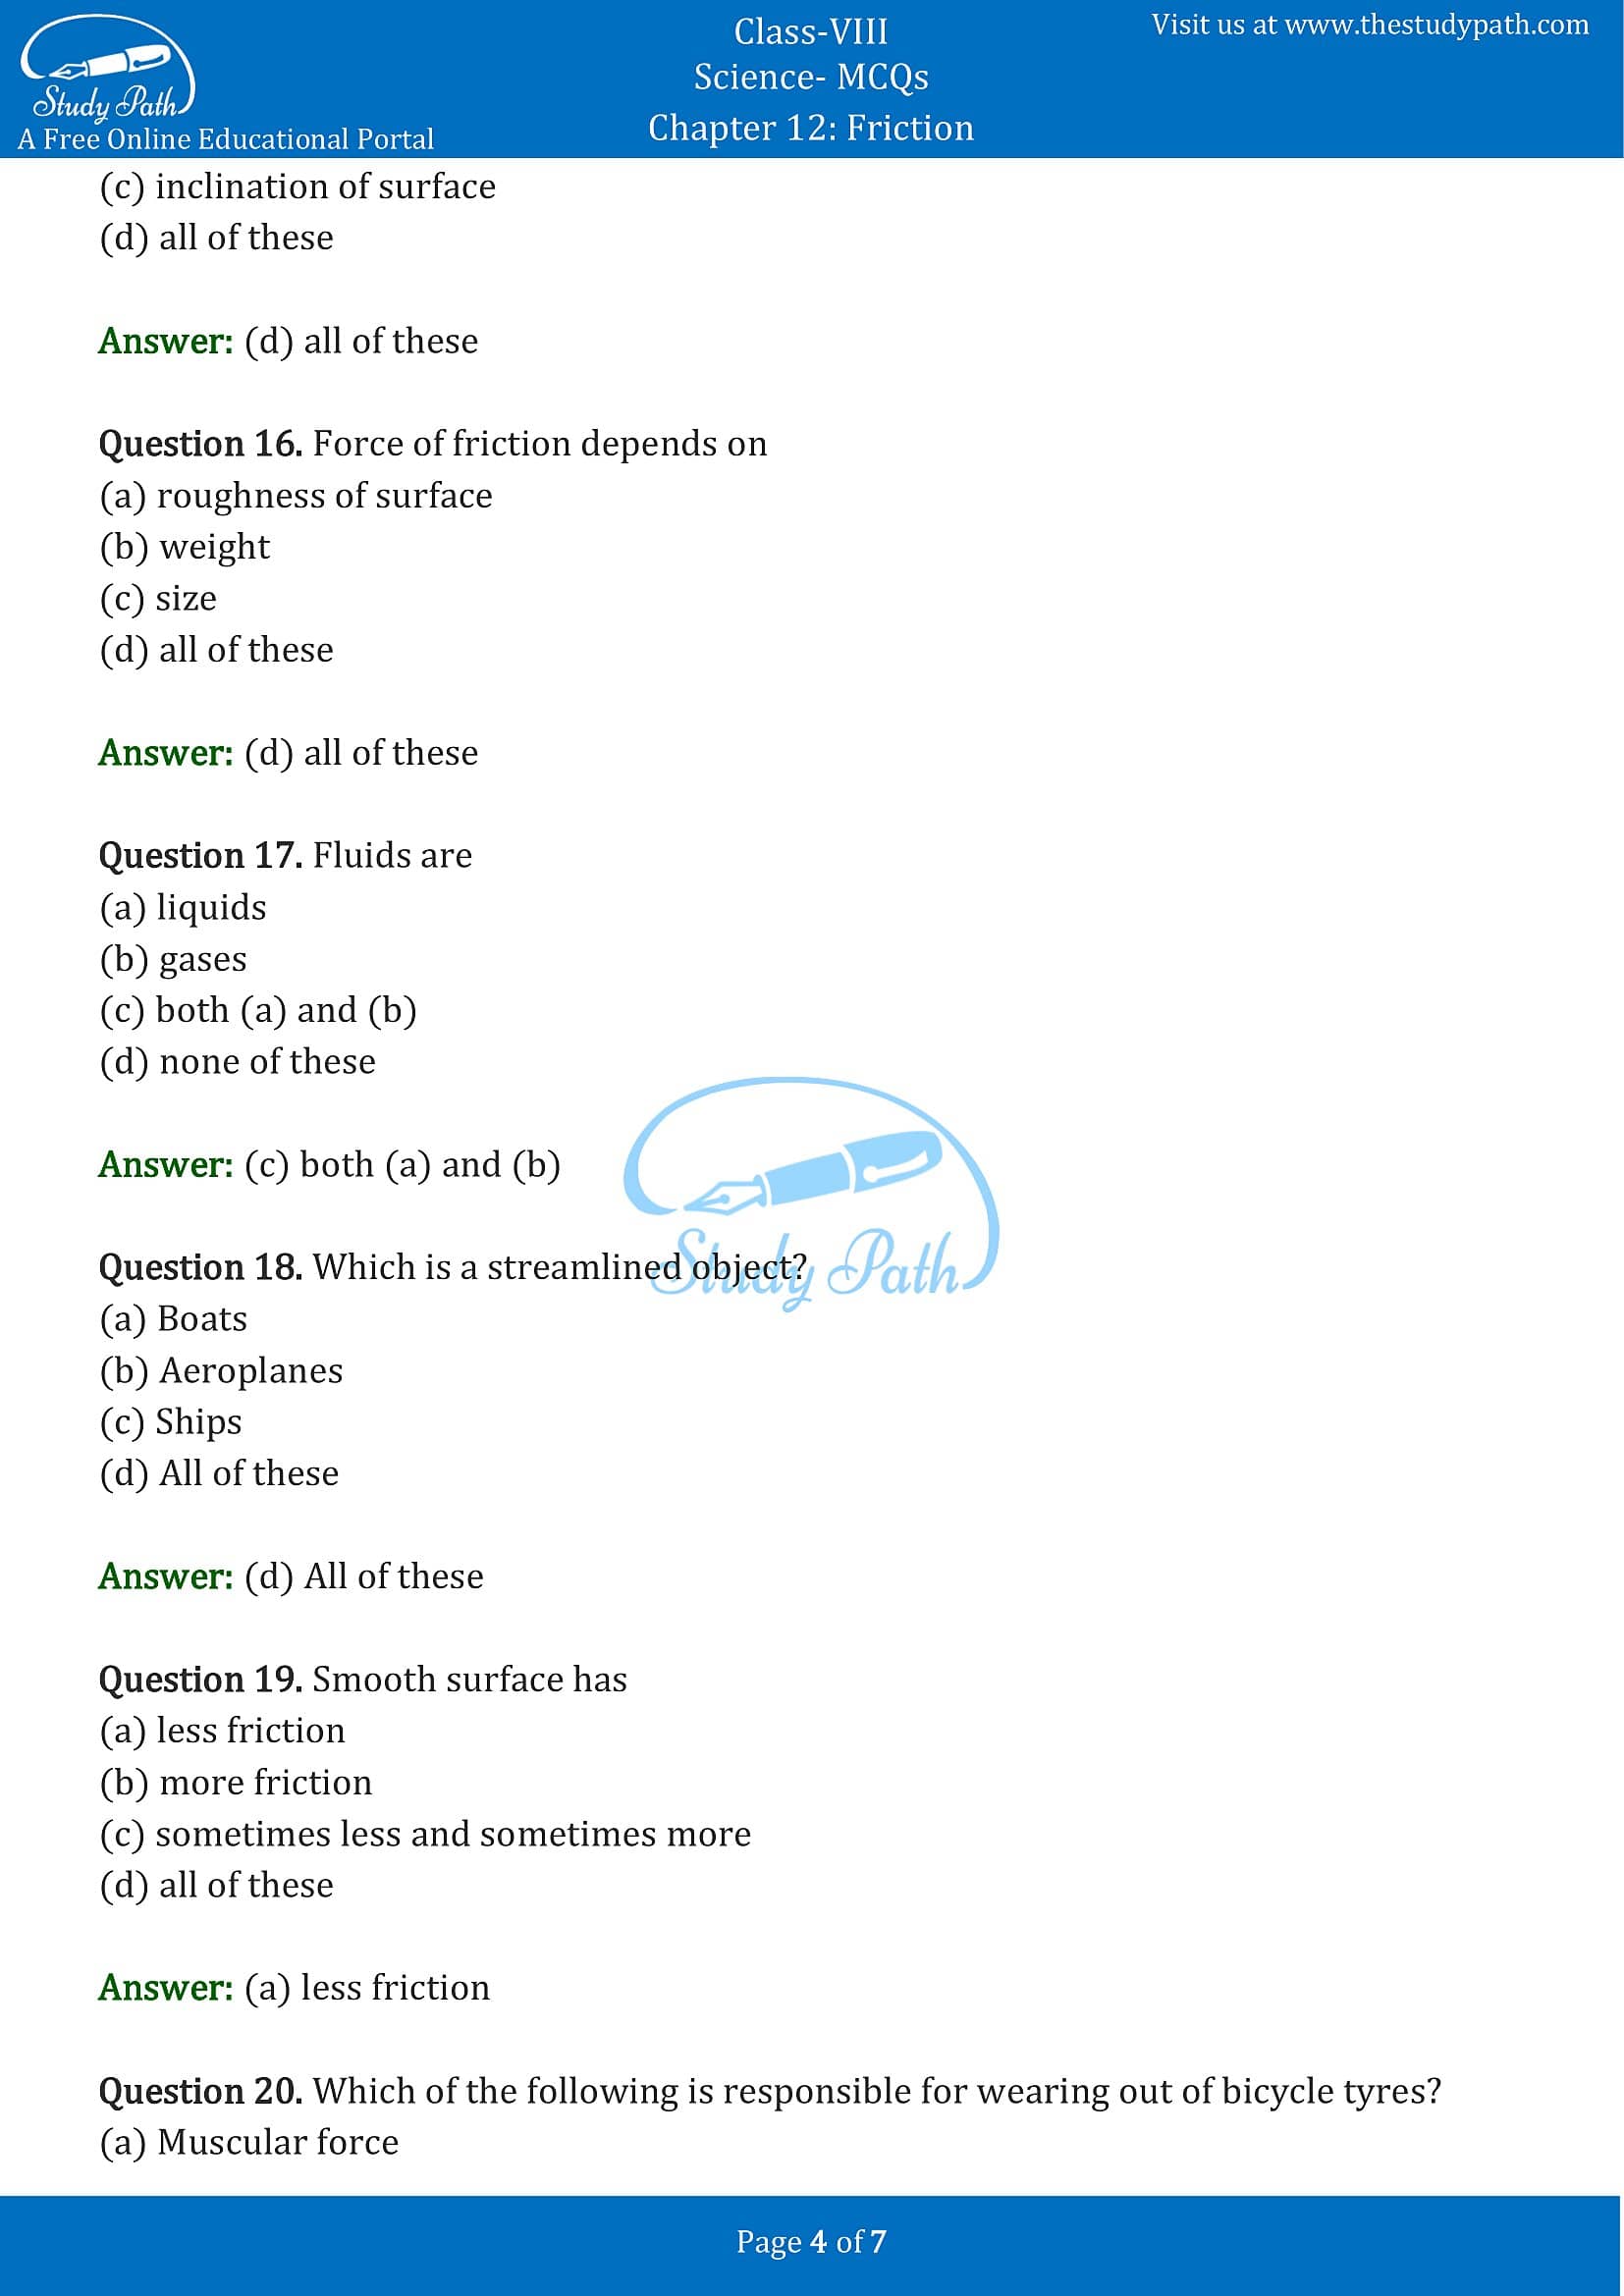 MCQ Questions for Class 8 Science Chapter 12 Friction with Answers PDF -4